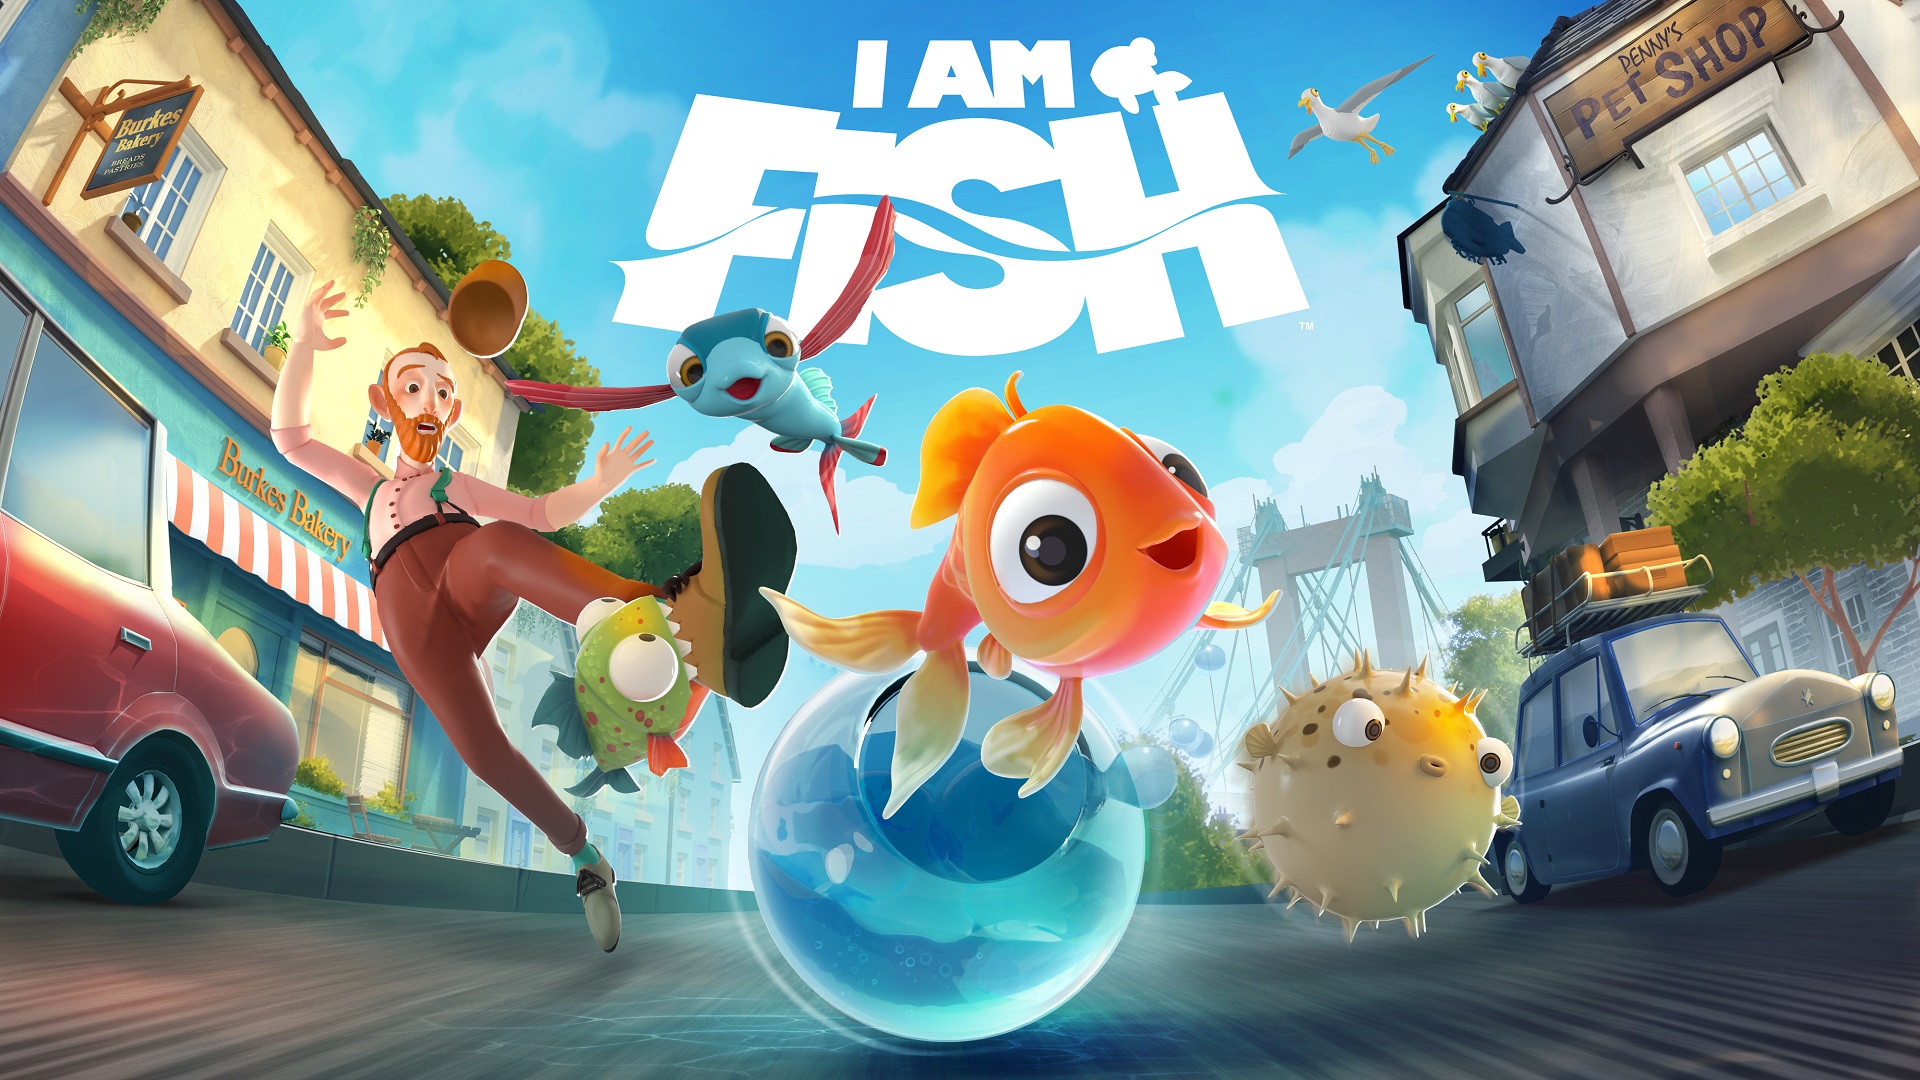 I Am Fish launches September 16